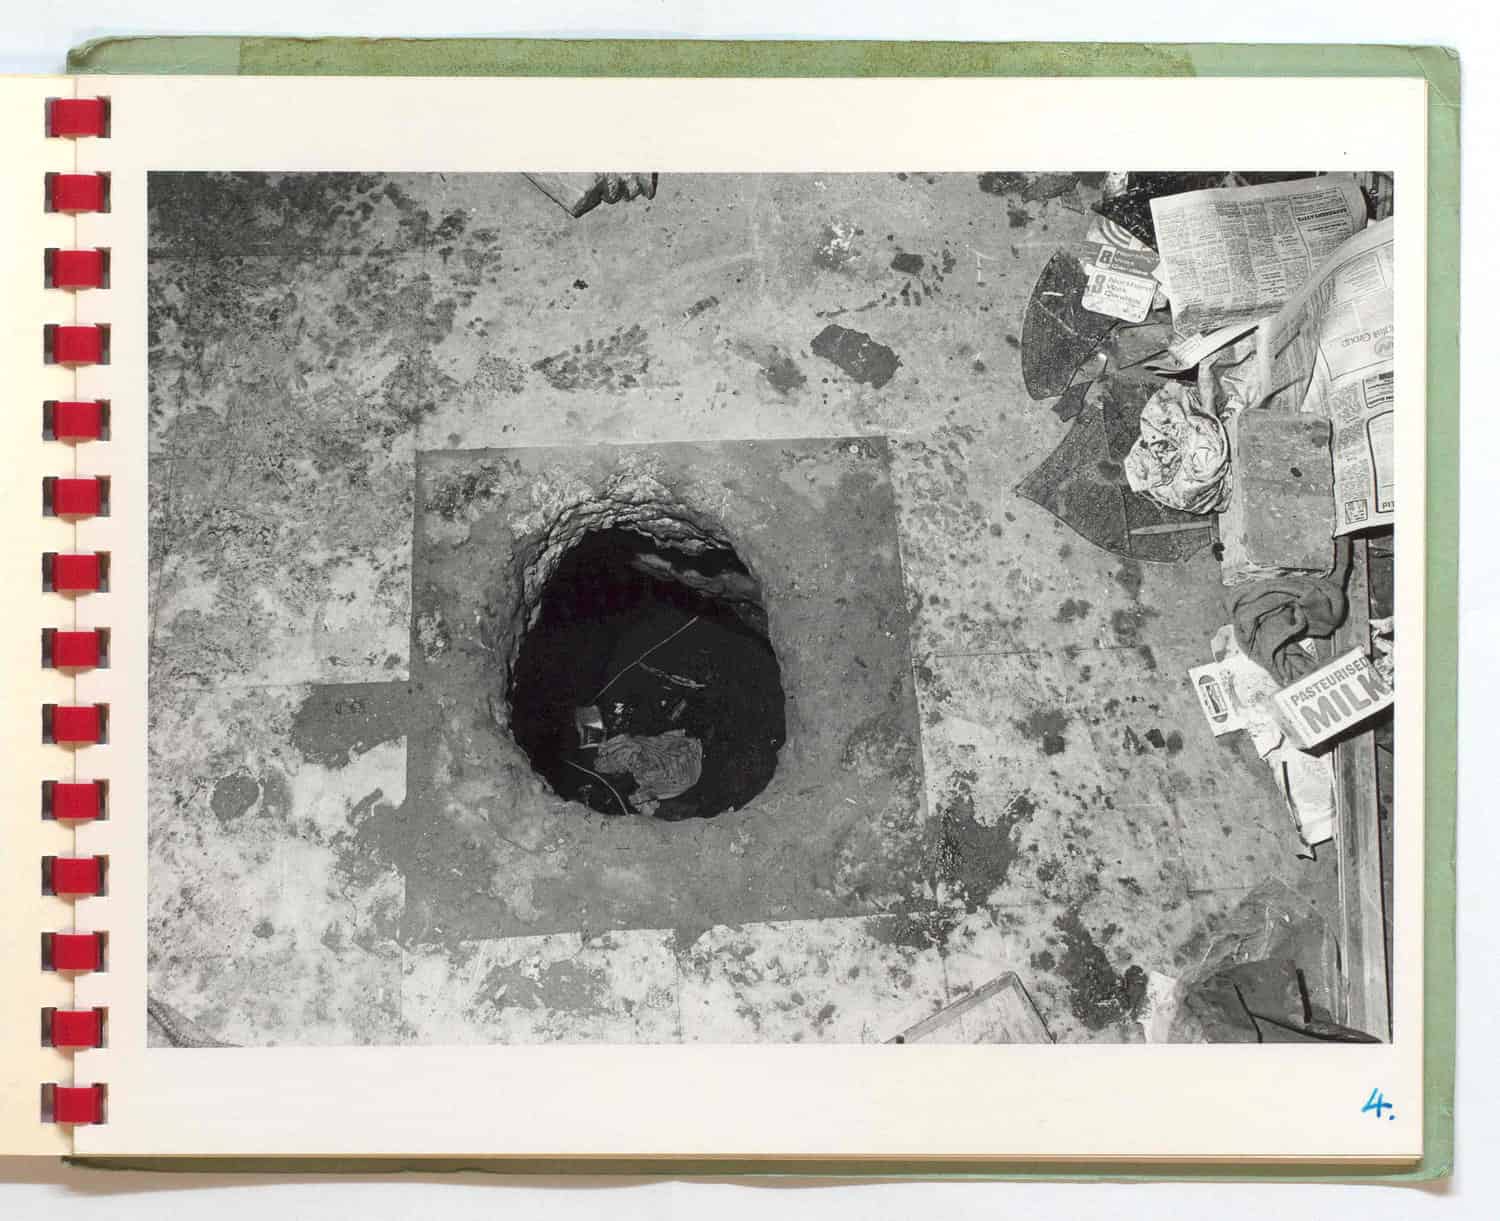 A hole dug into the concrete of a cell.